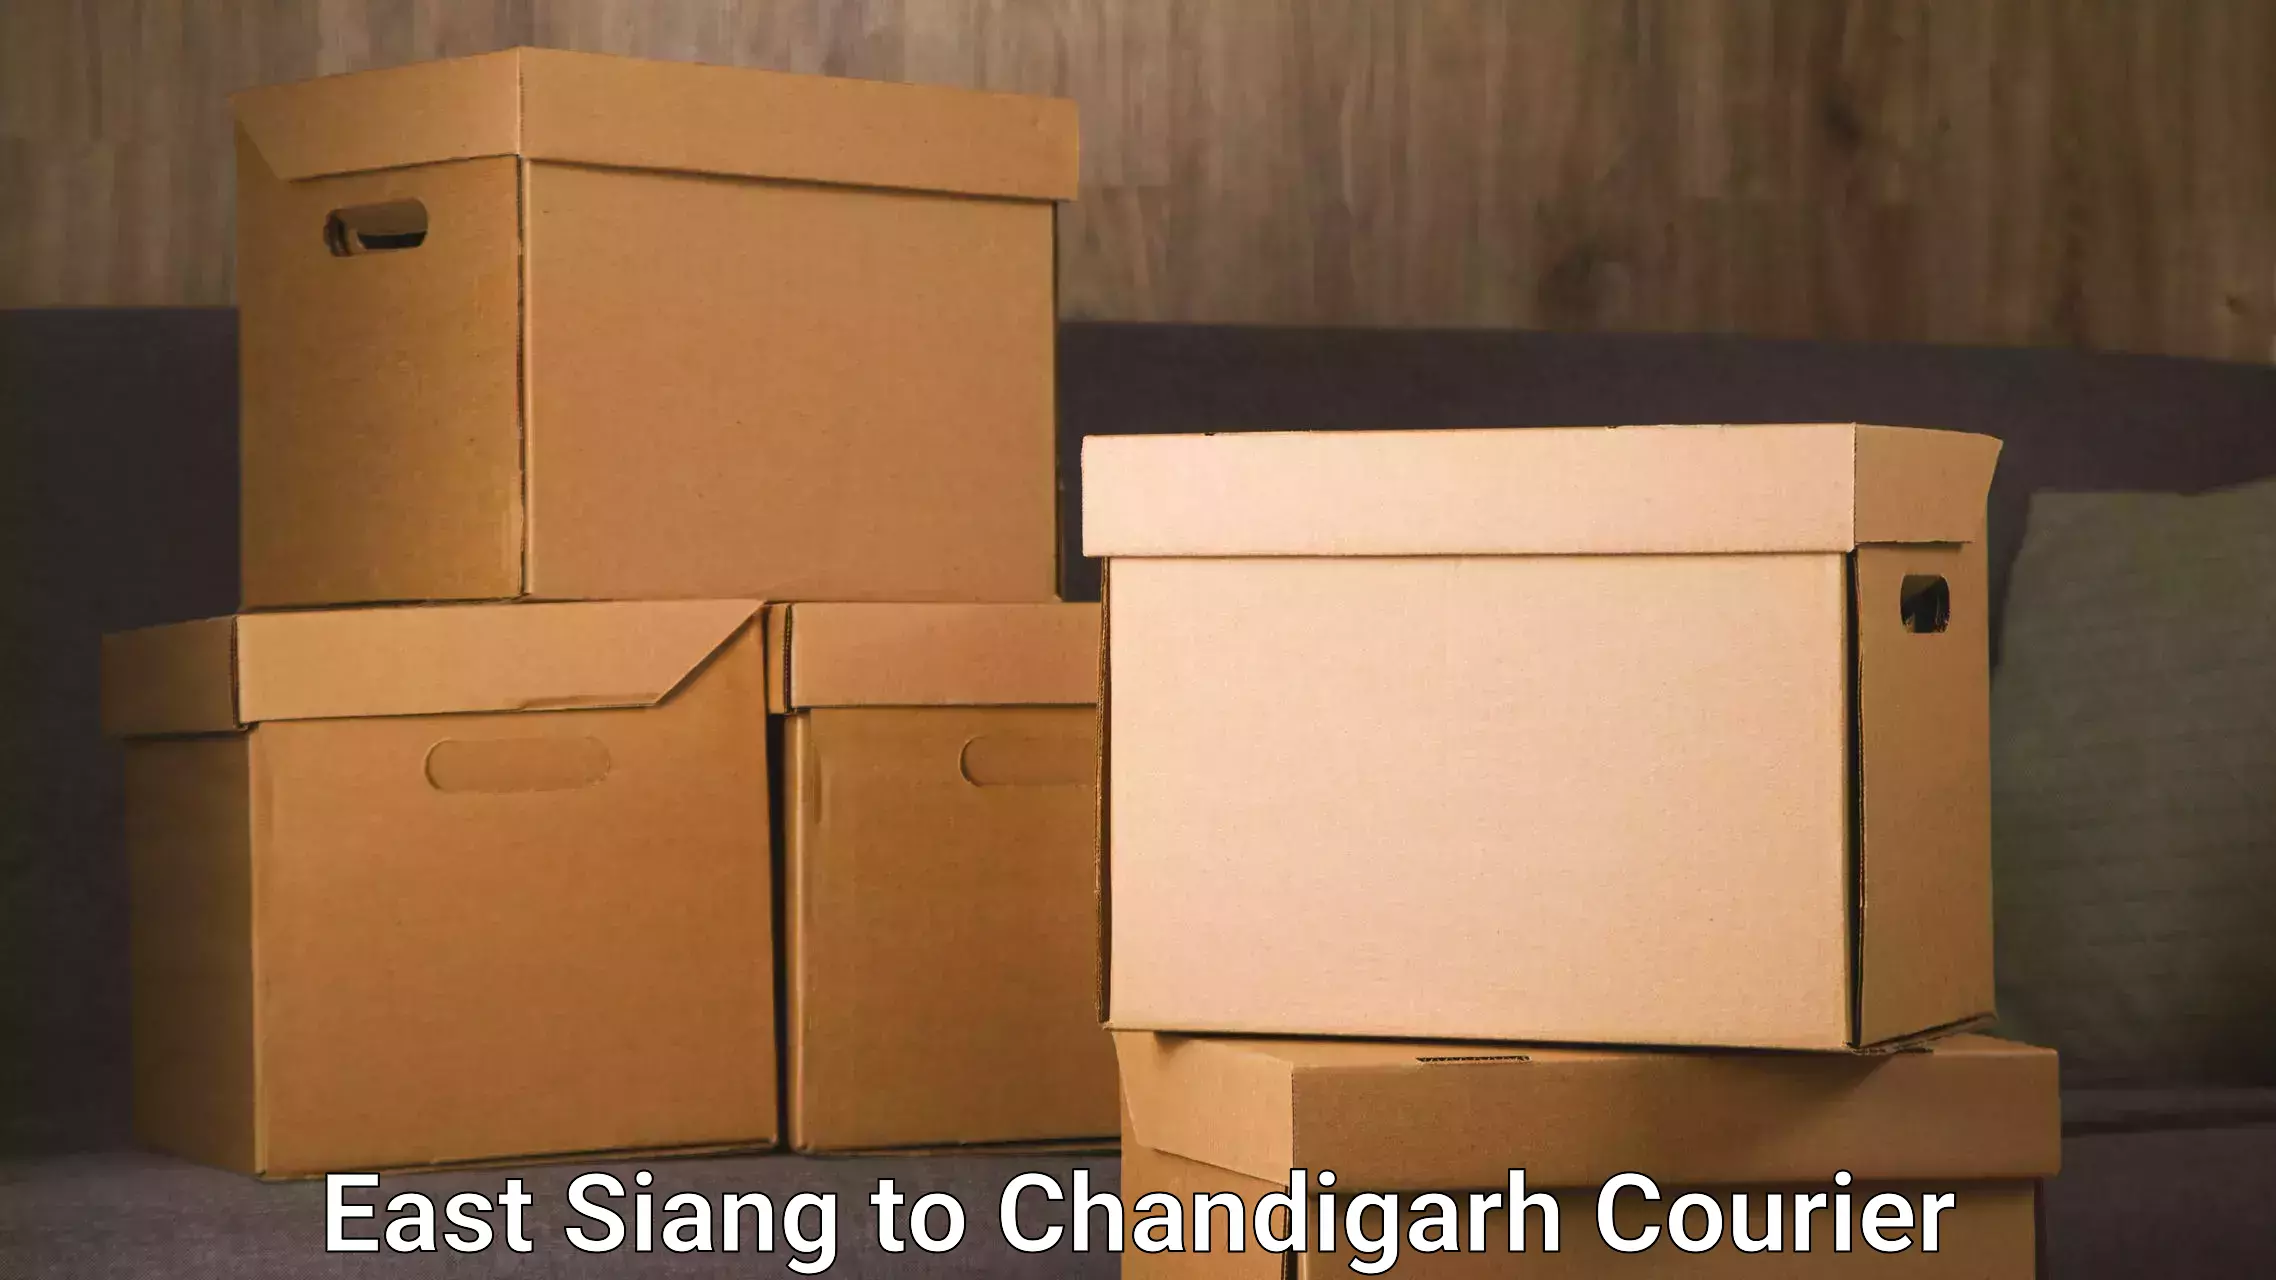 Speedy delivery service East Siang to Chandigarh